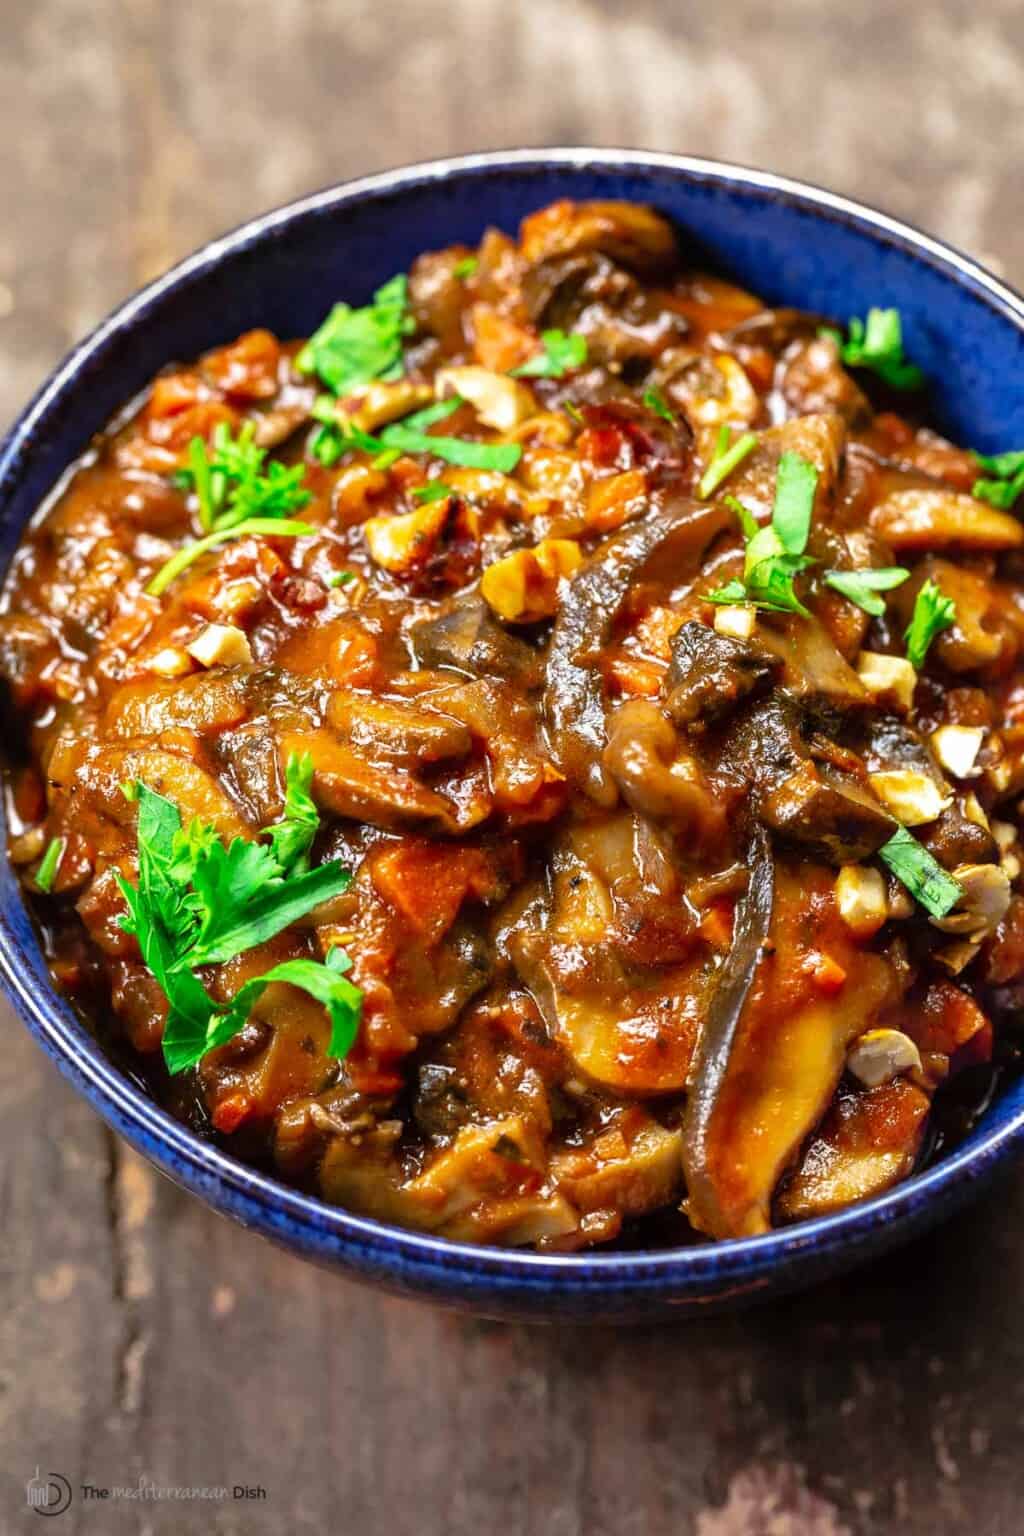 Quick and Easy Mushroom Ragù You'll Make on Repeat - The Mediterranean Dish